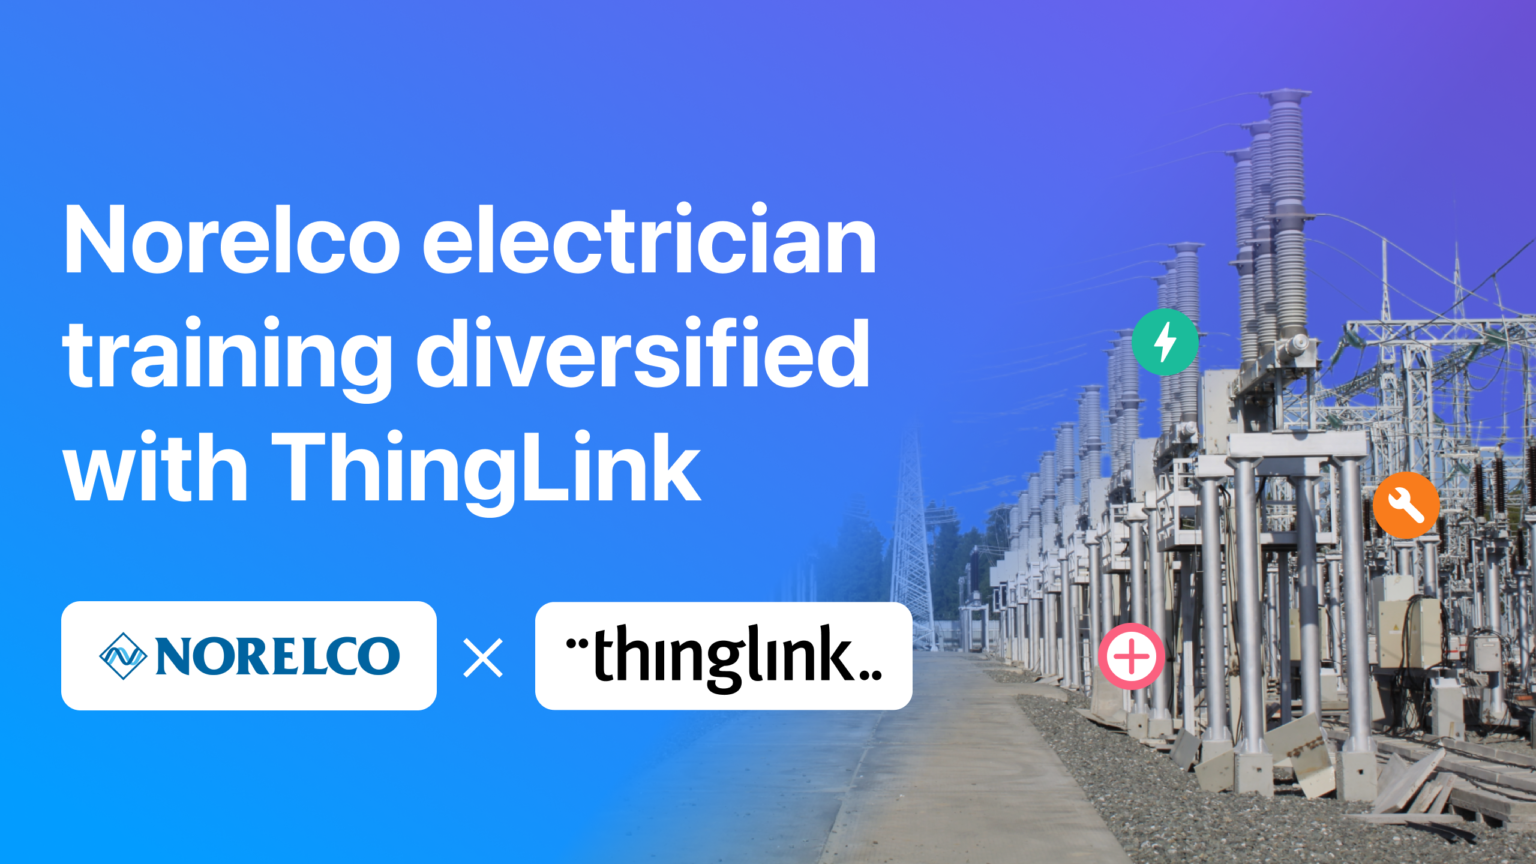 Norelco electrician training diversified with ThingLink